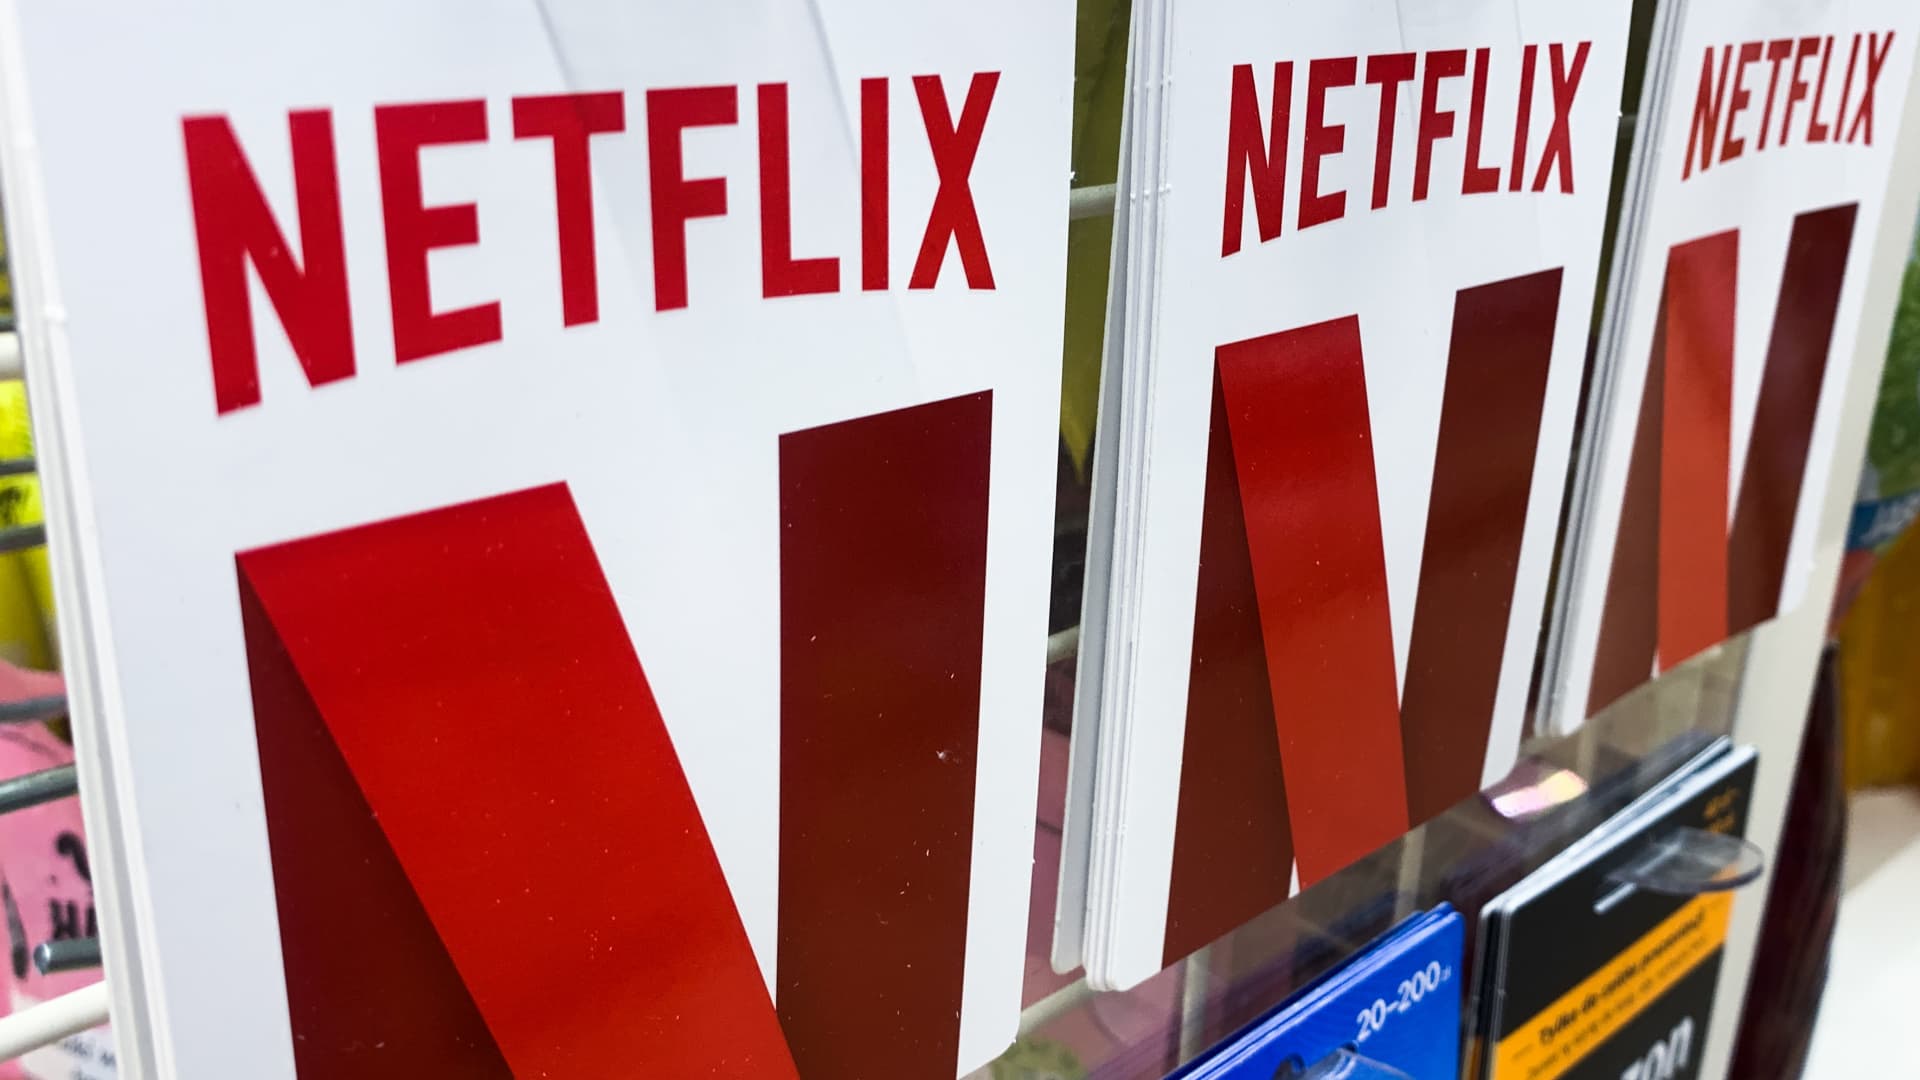 Netflix to open video game studio in Finland, looks to boost audience